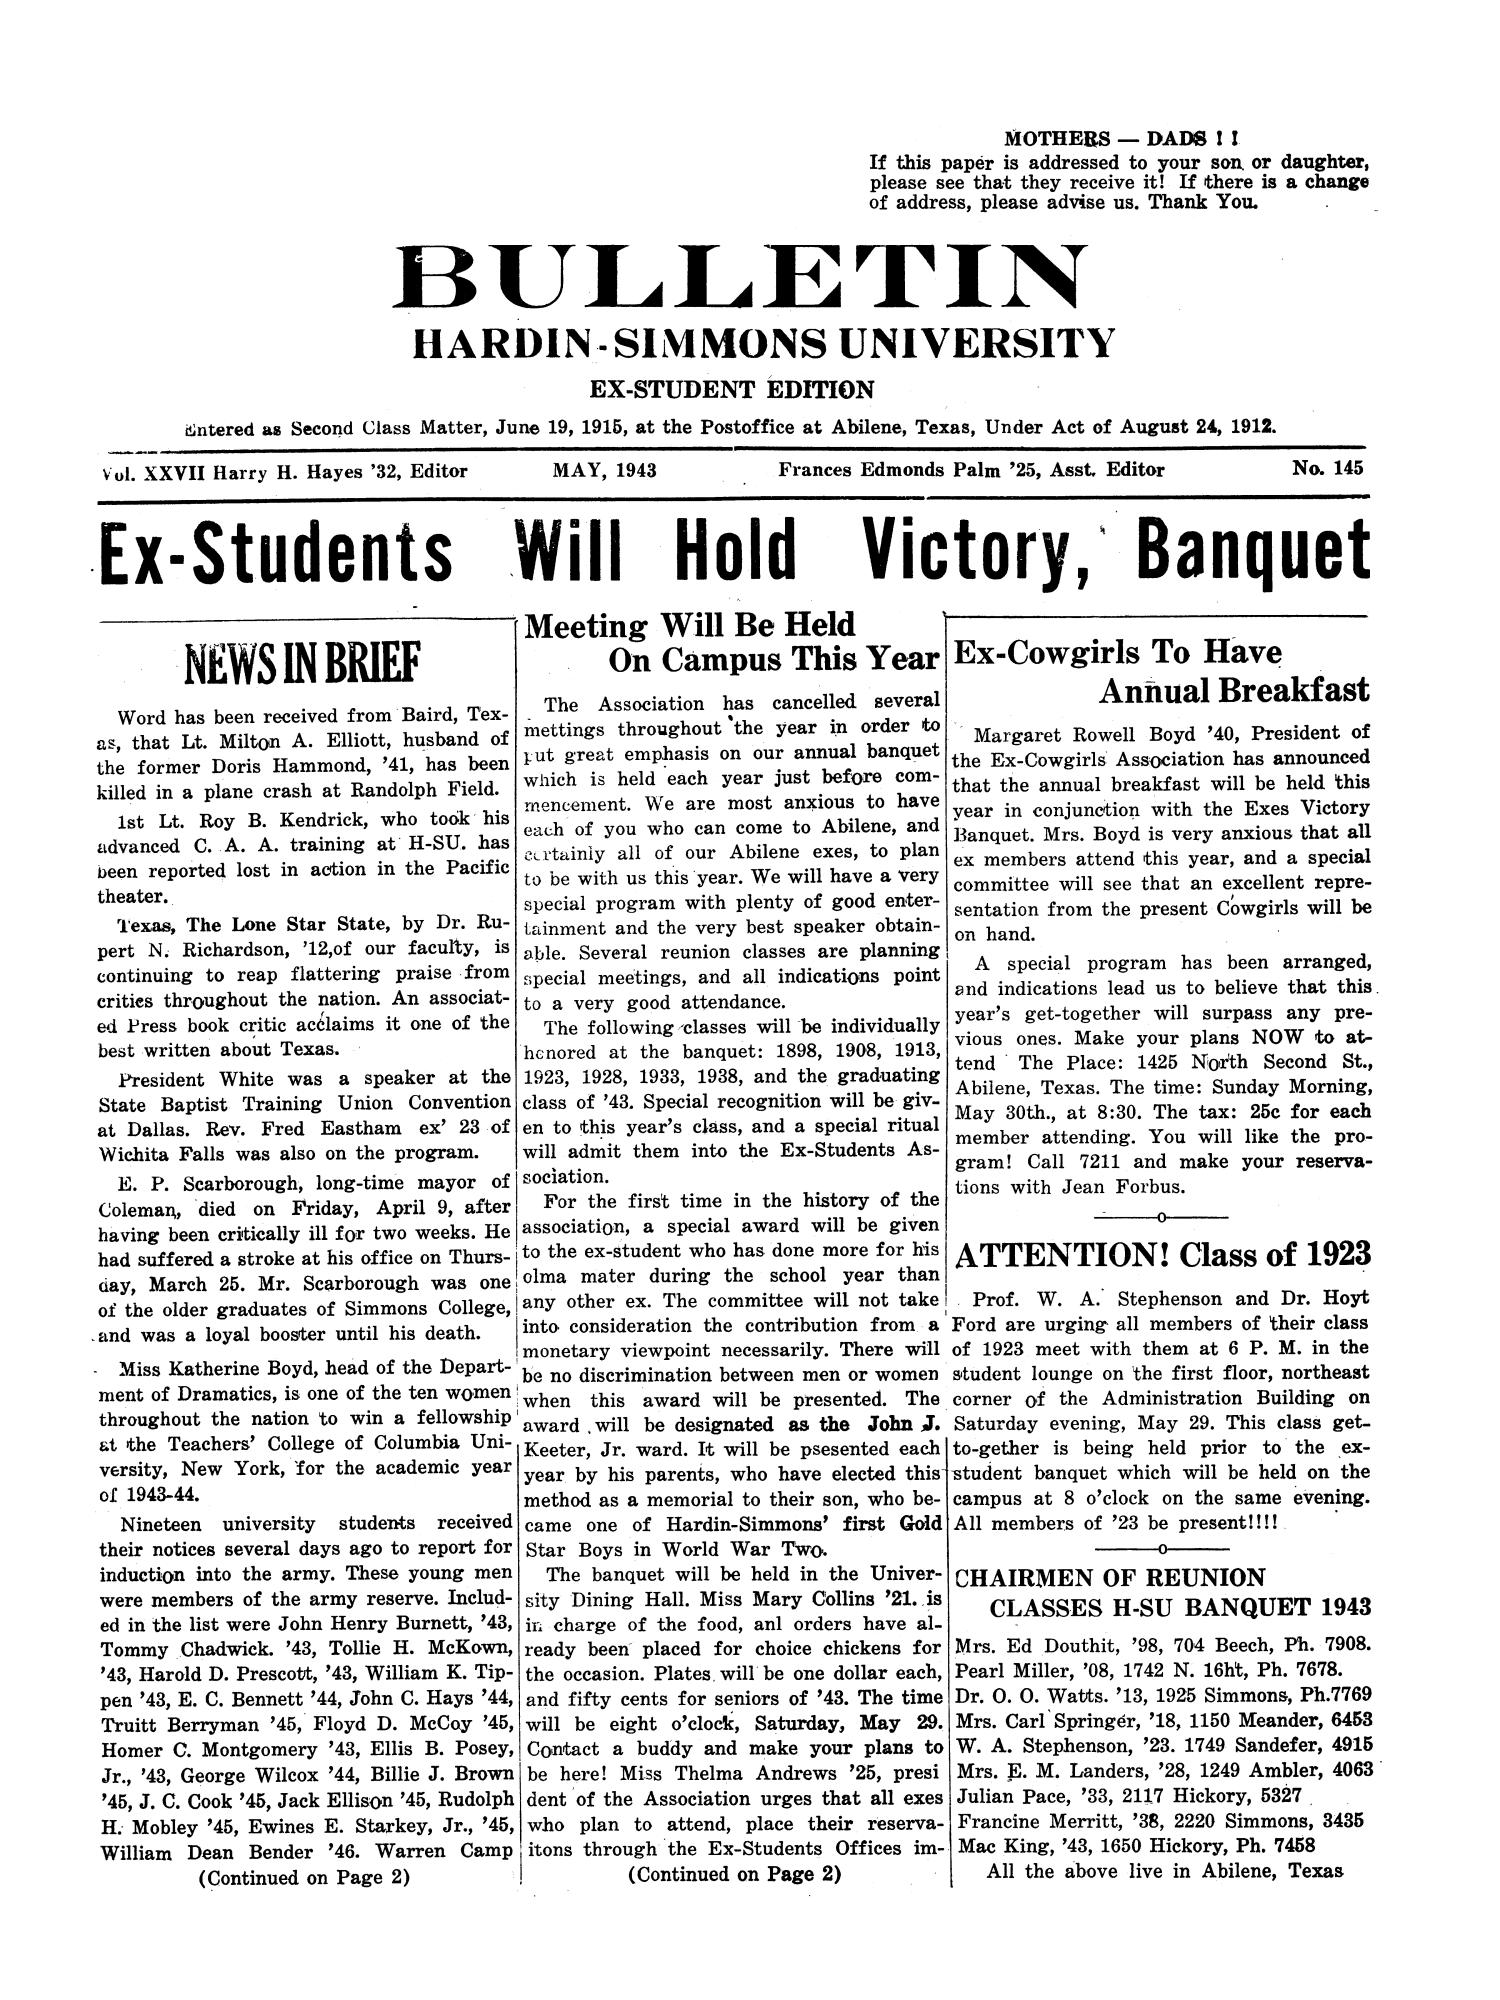 bulletin-hardin-simmons-university-ex-student-edition-may-1943-page-1-the-portal-to-texas